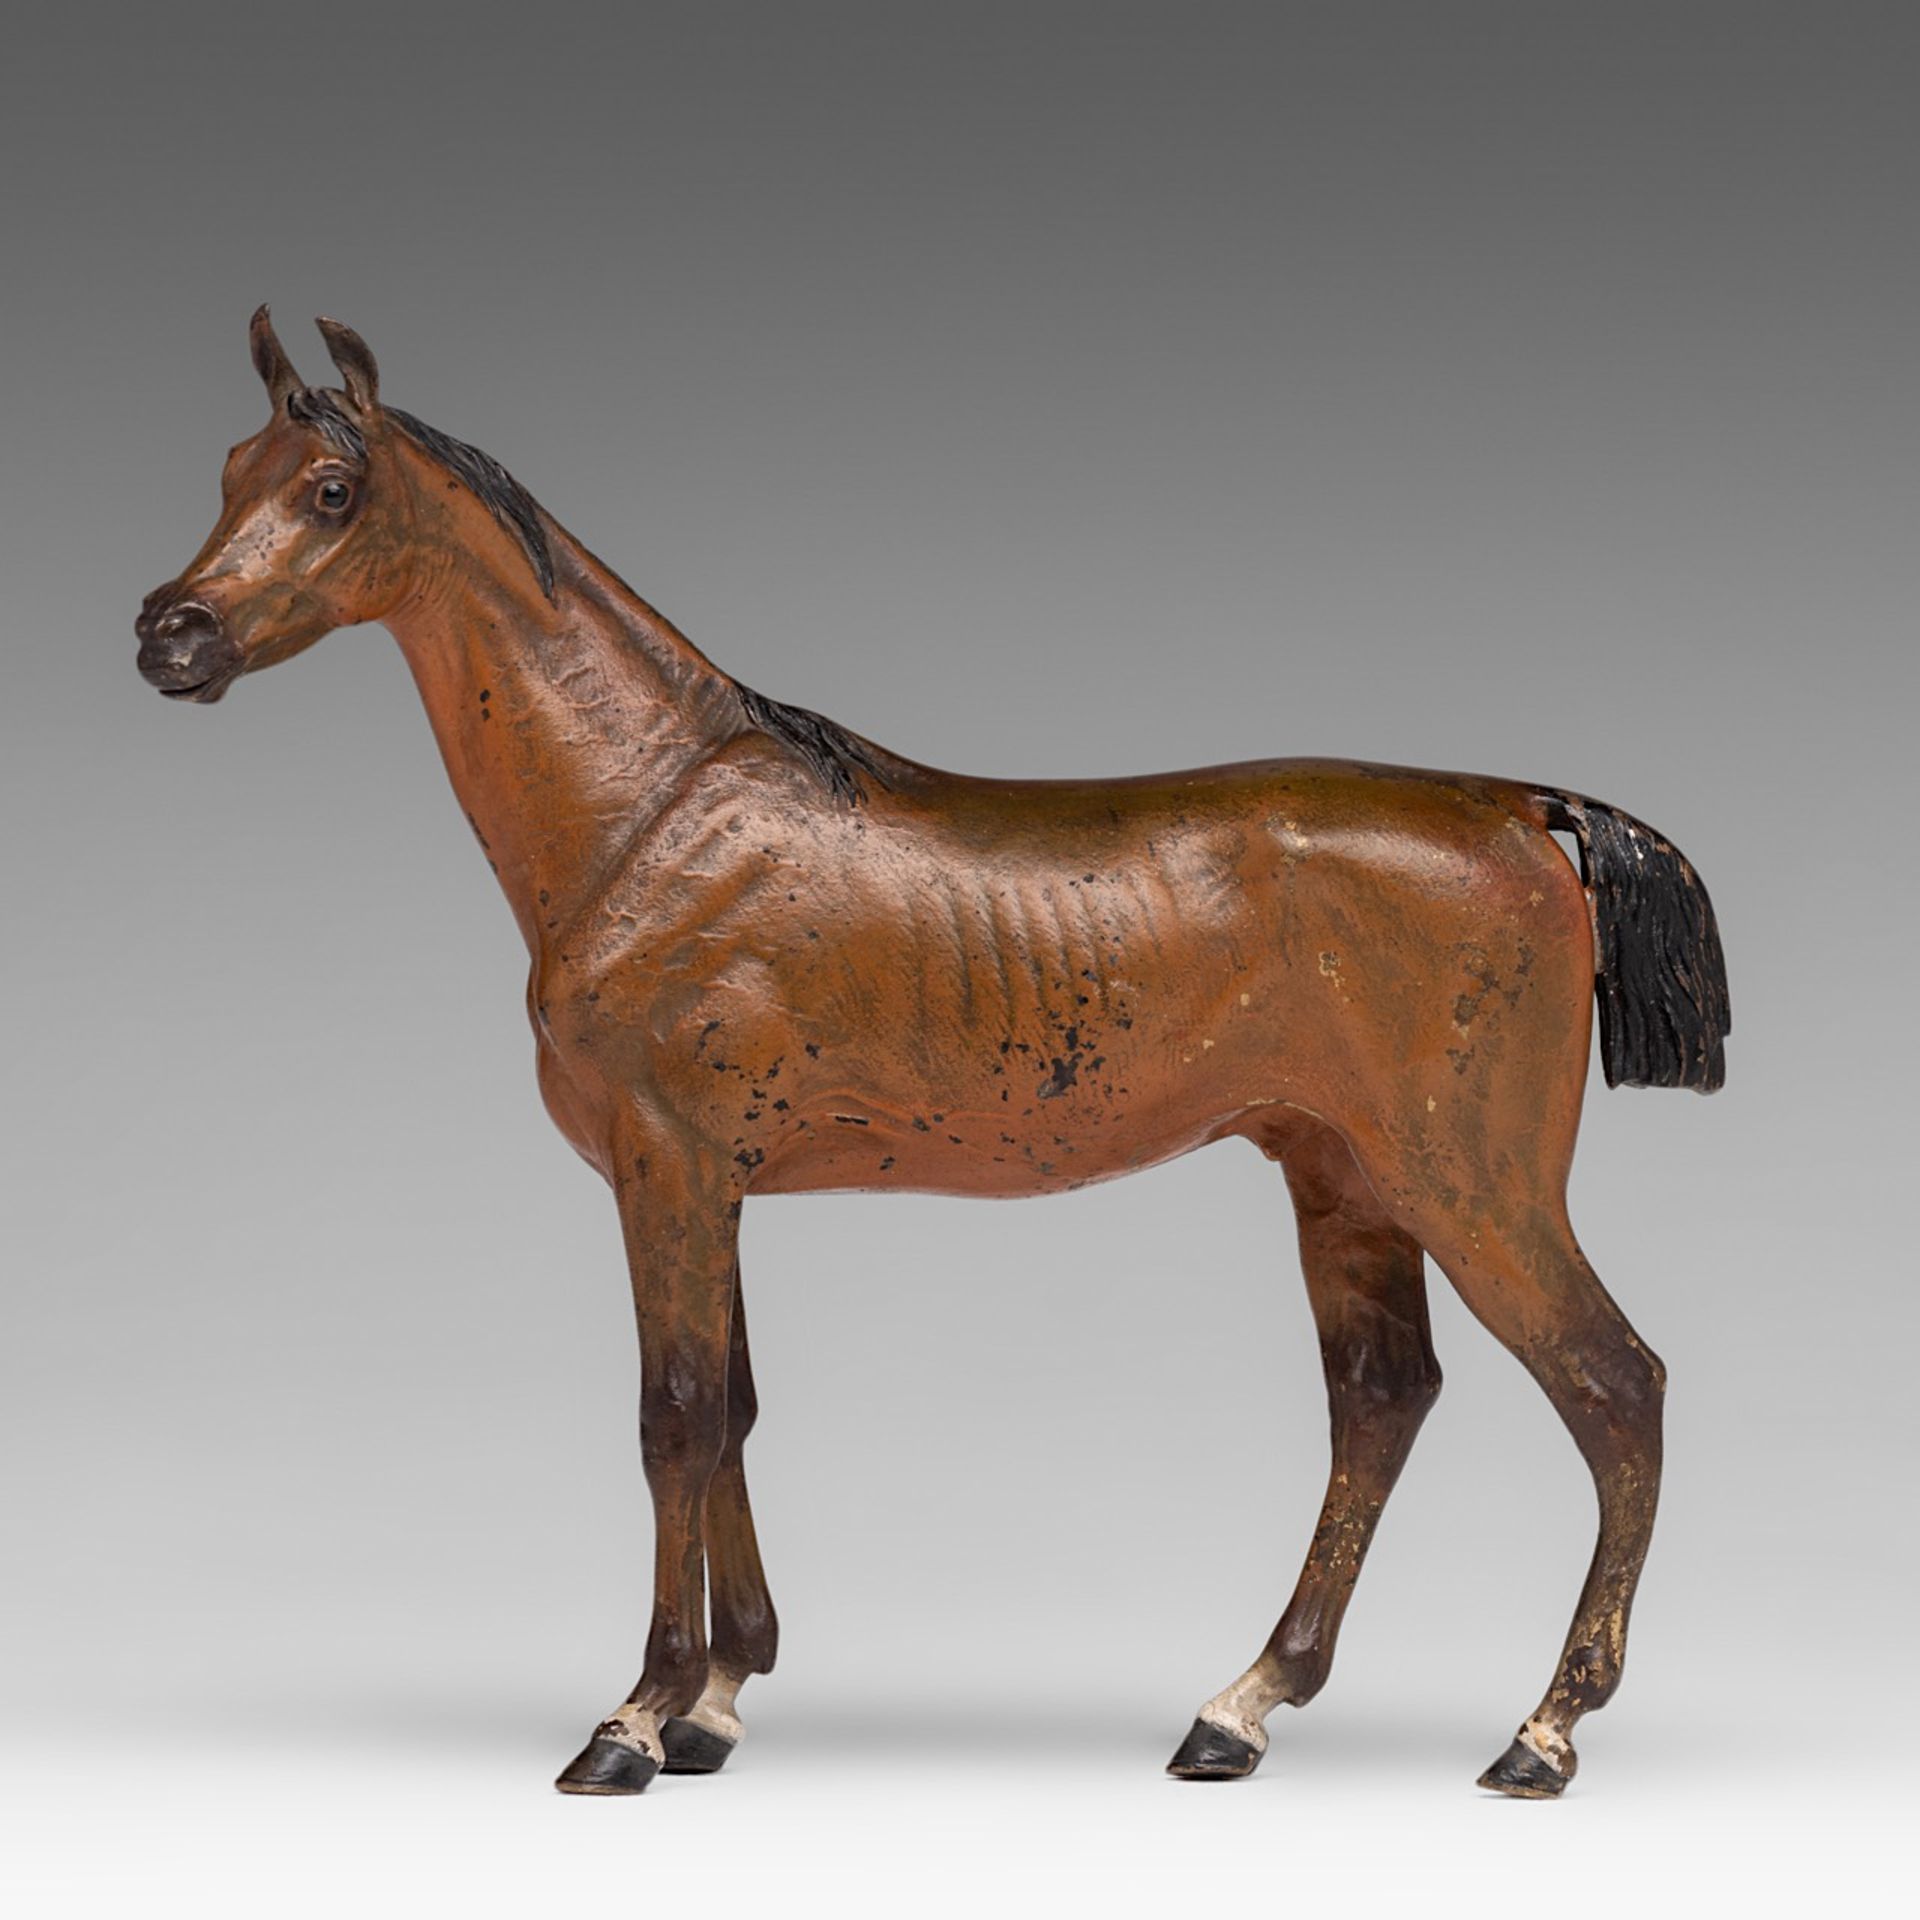 A Vienna cold-painted bronze horse figure, unmarked, H 17,5 - W 19 cm